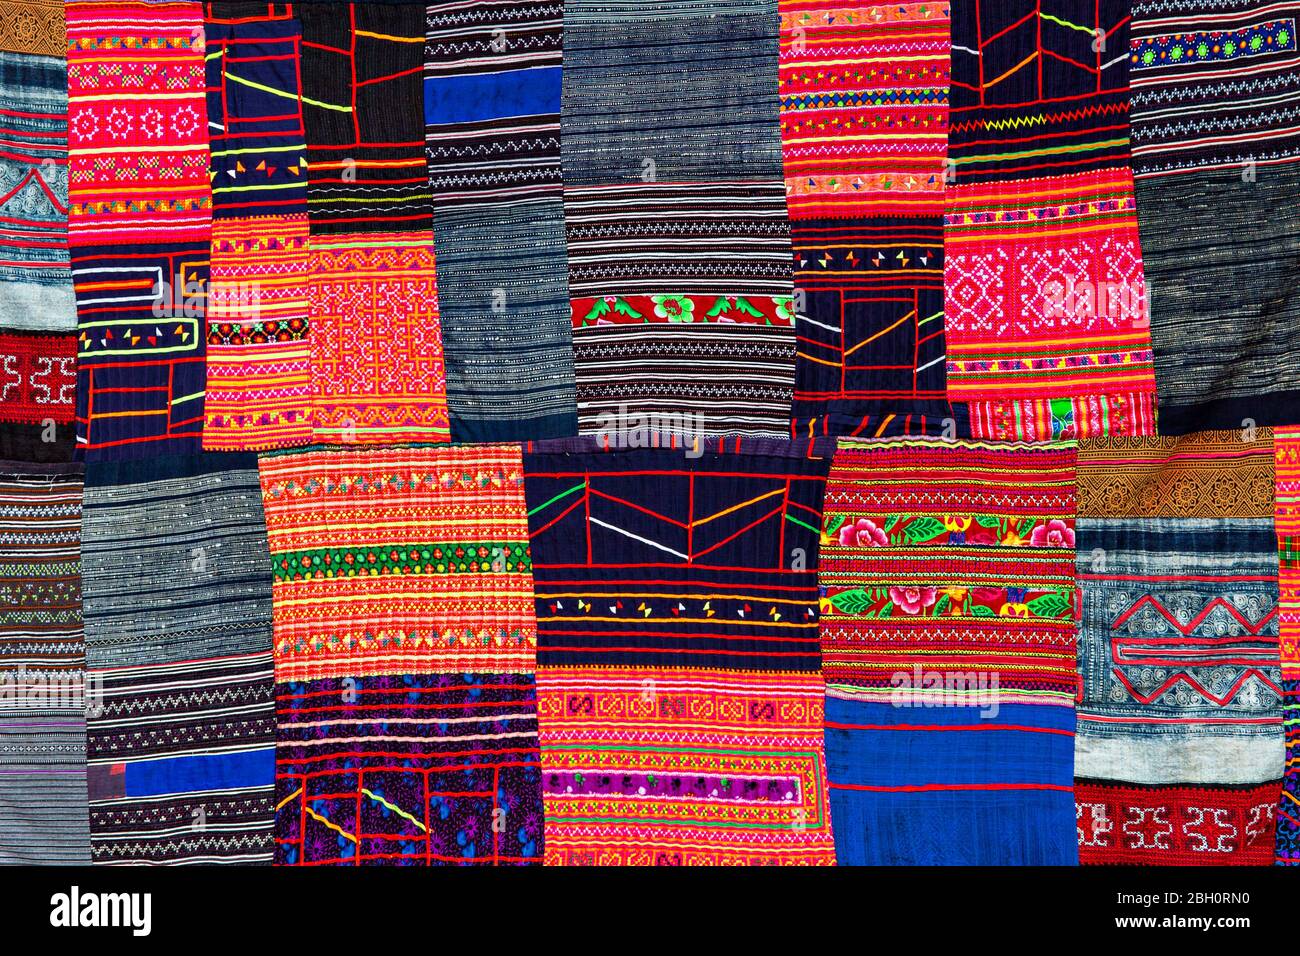 Patchwork with woven textiles in Thailand Stock Photo